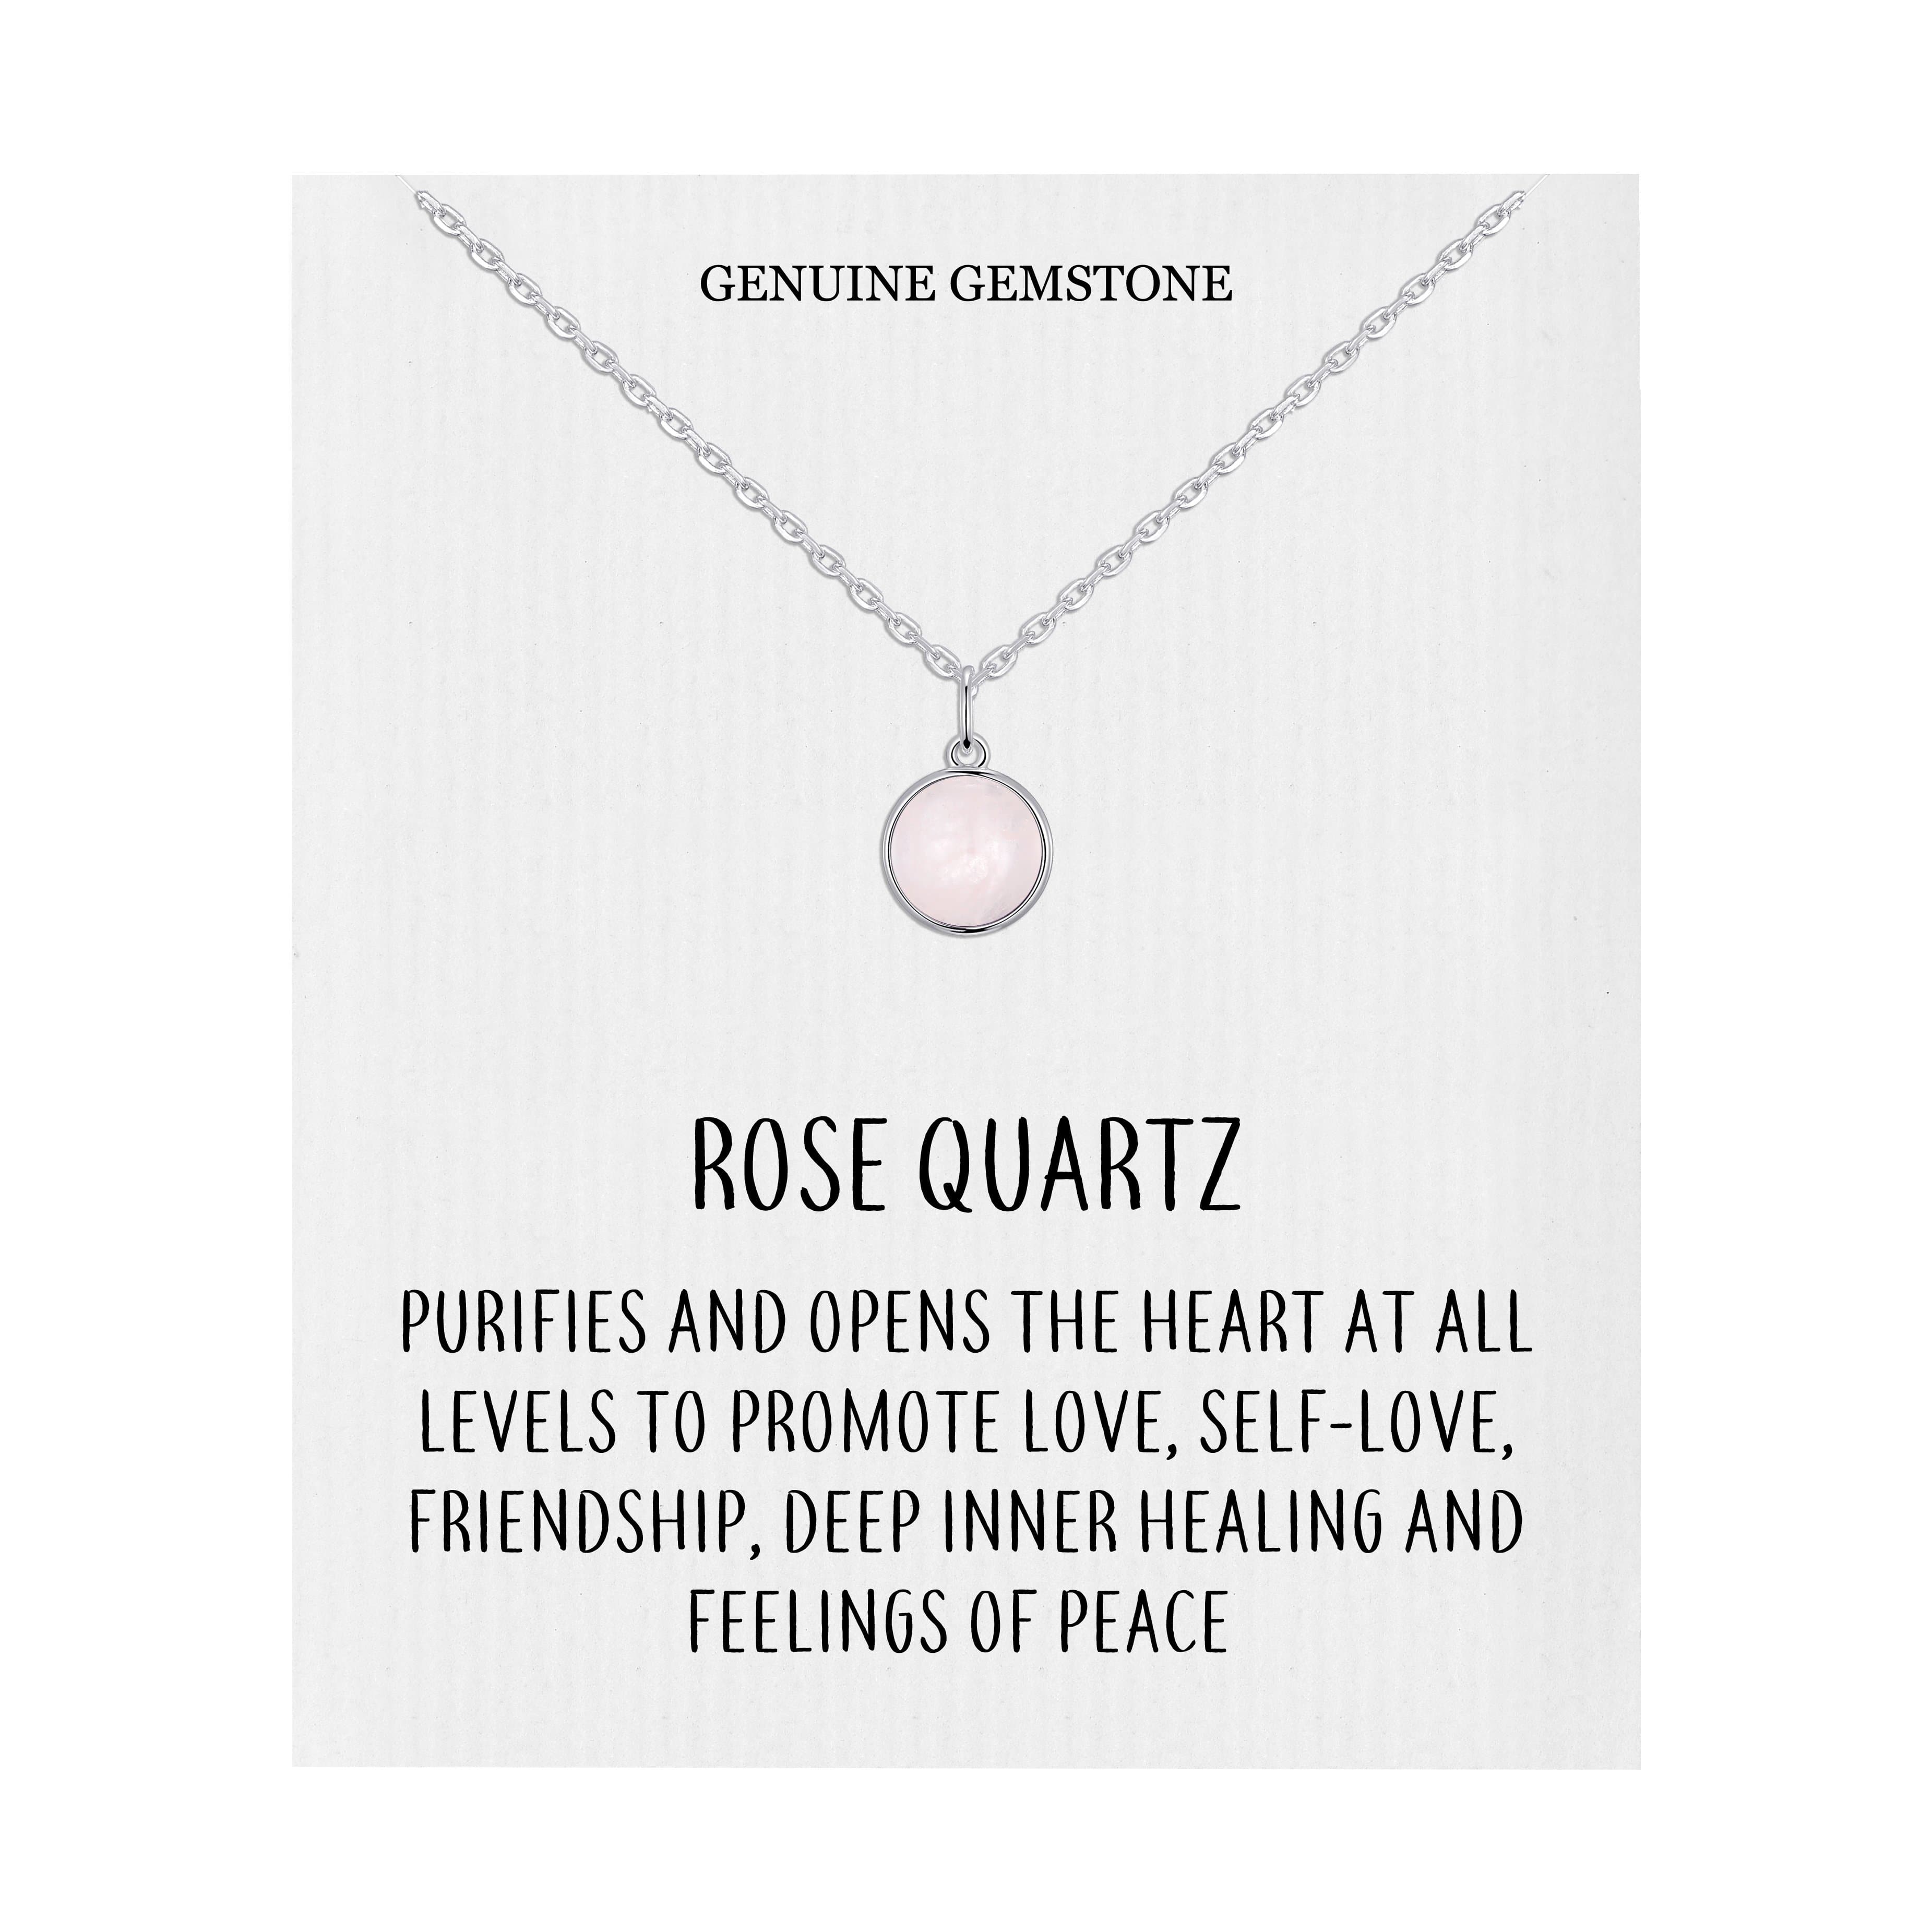 Rose Quartz Necklace with Quote Card by Philip Jones Jewellery